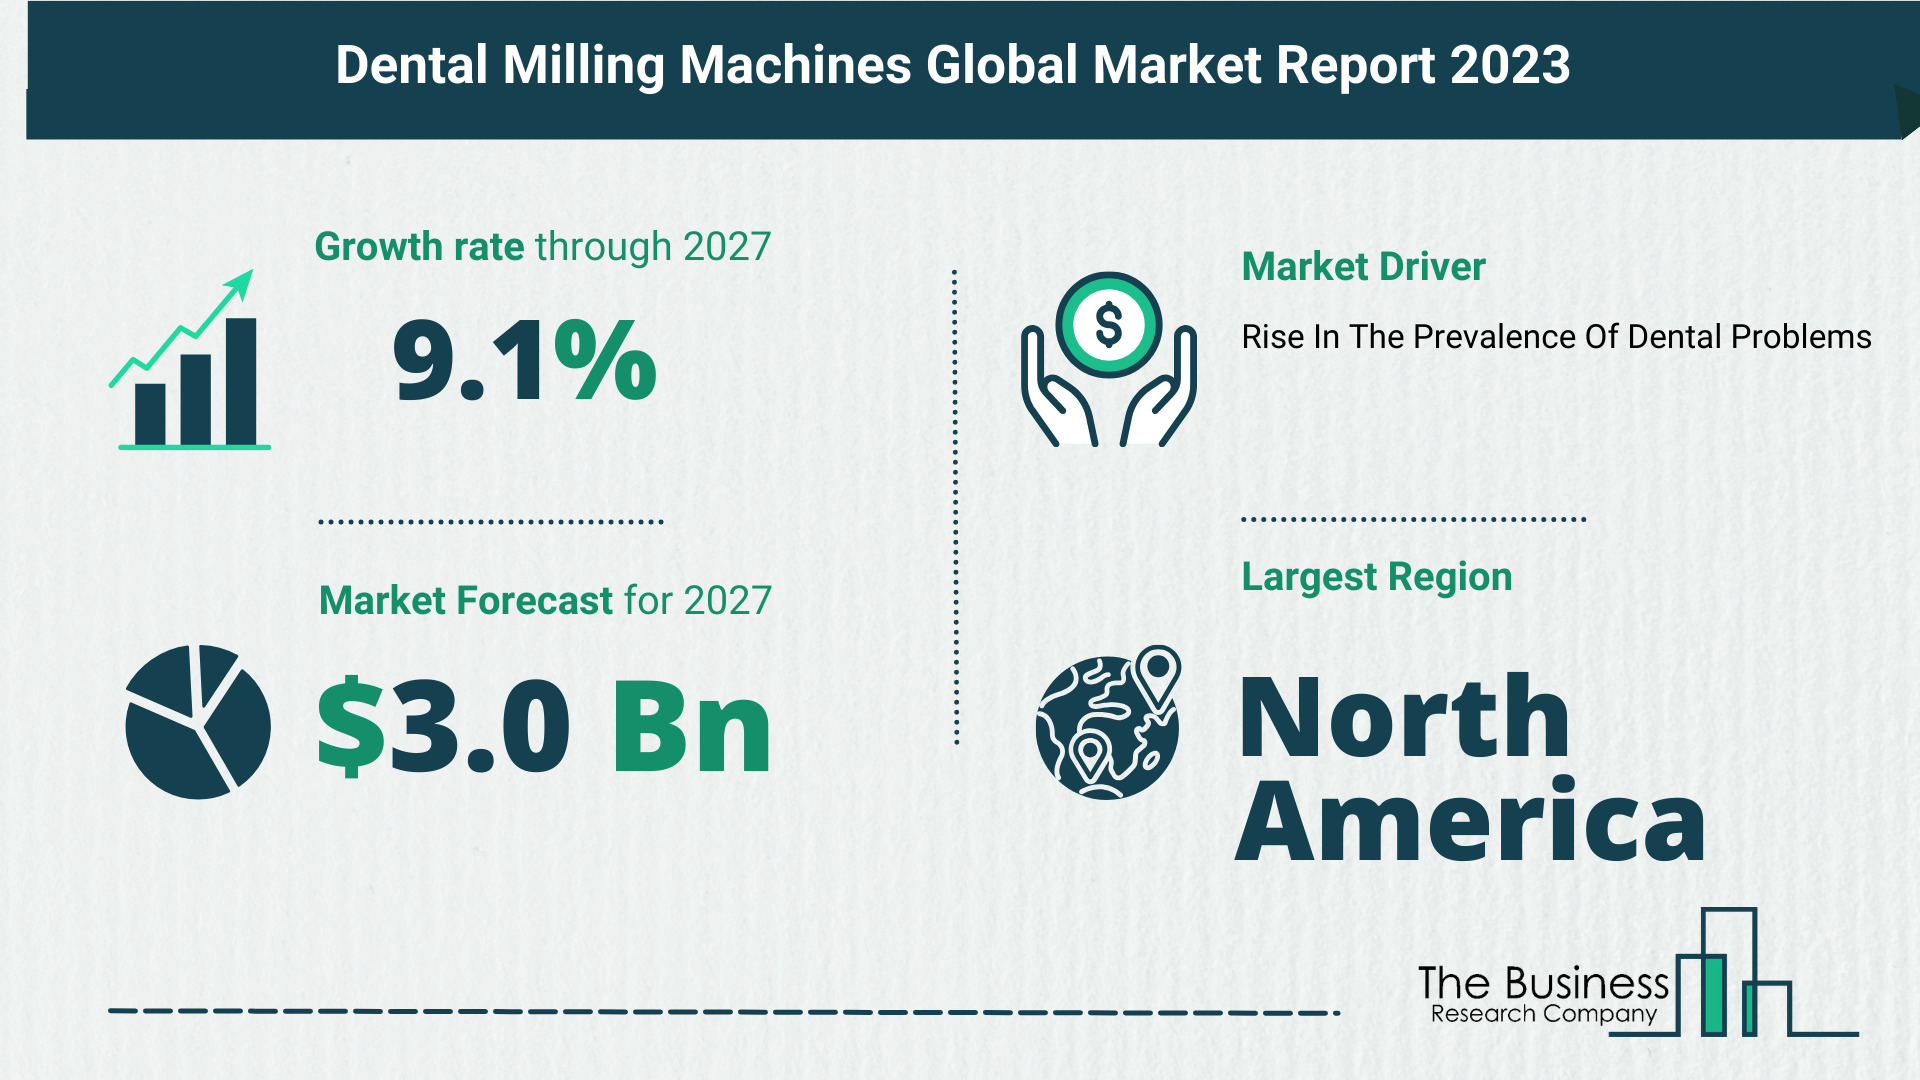 5 Takeaways From The Dental Milling Machines Market Overview 2023